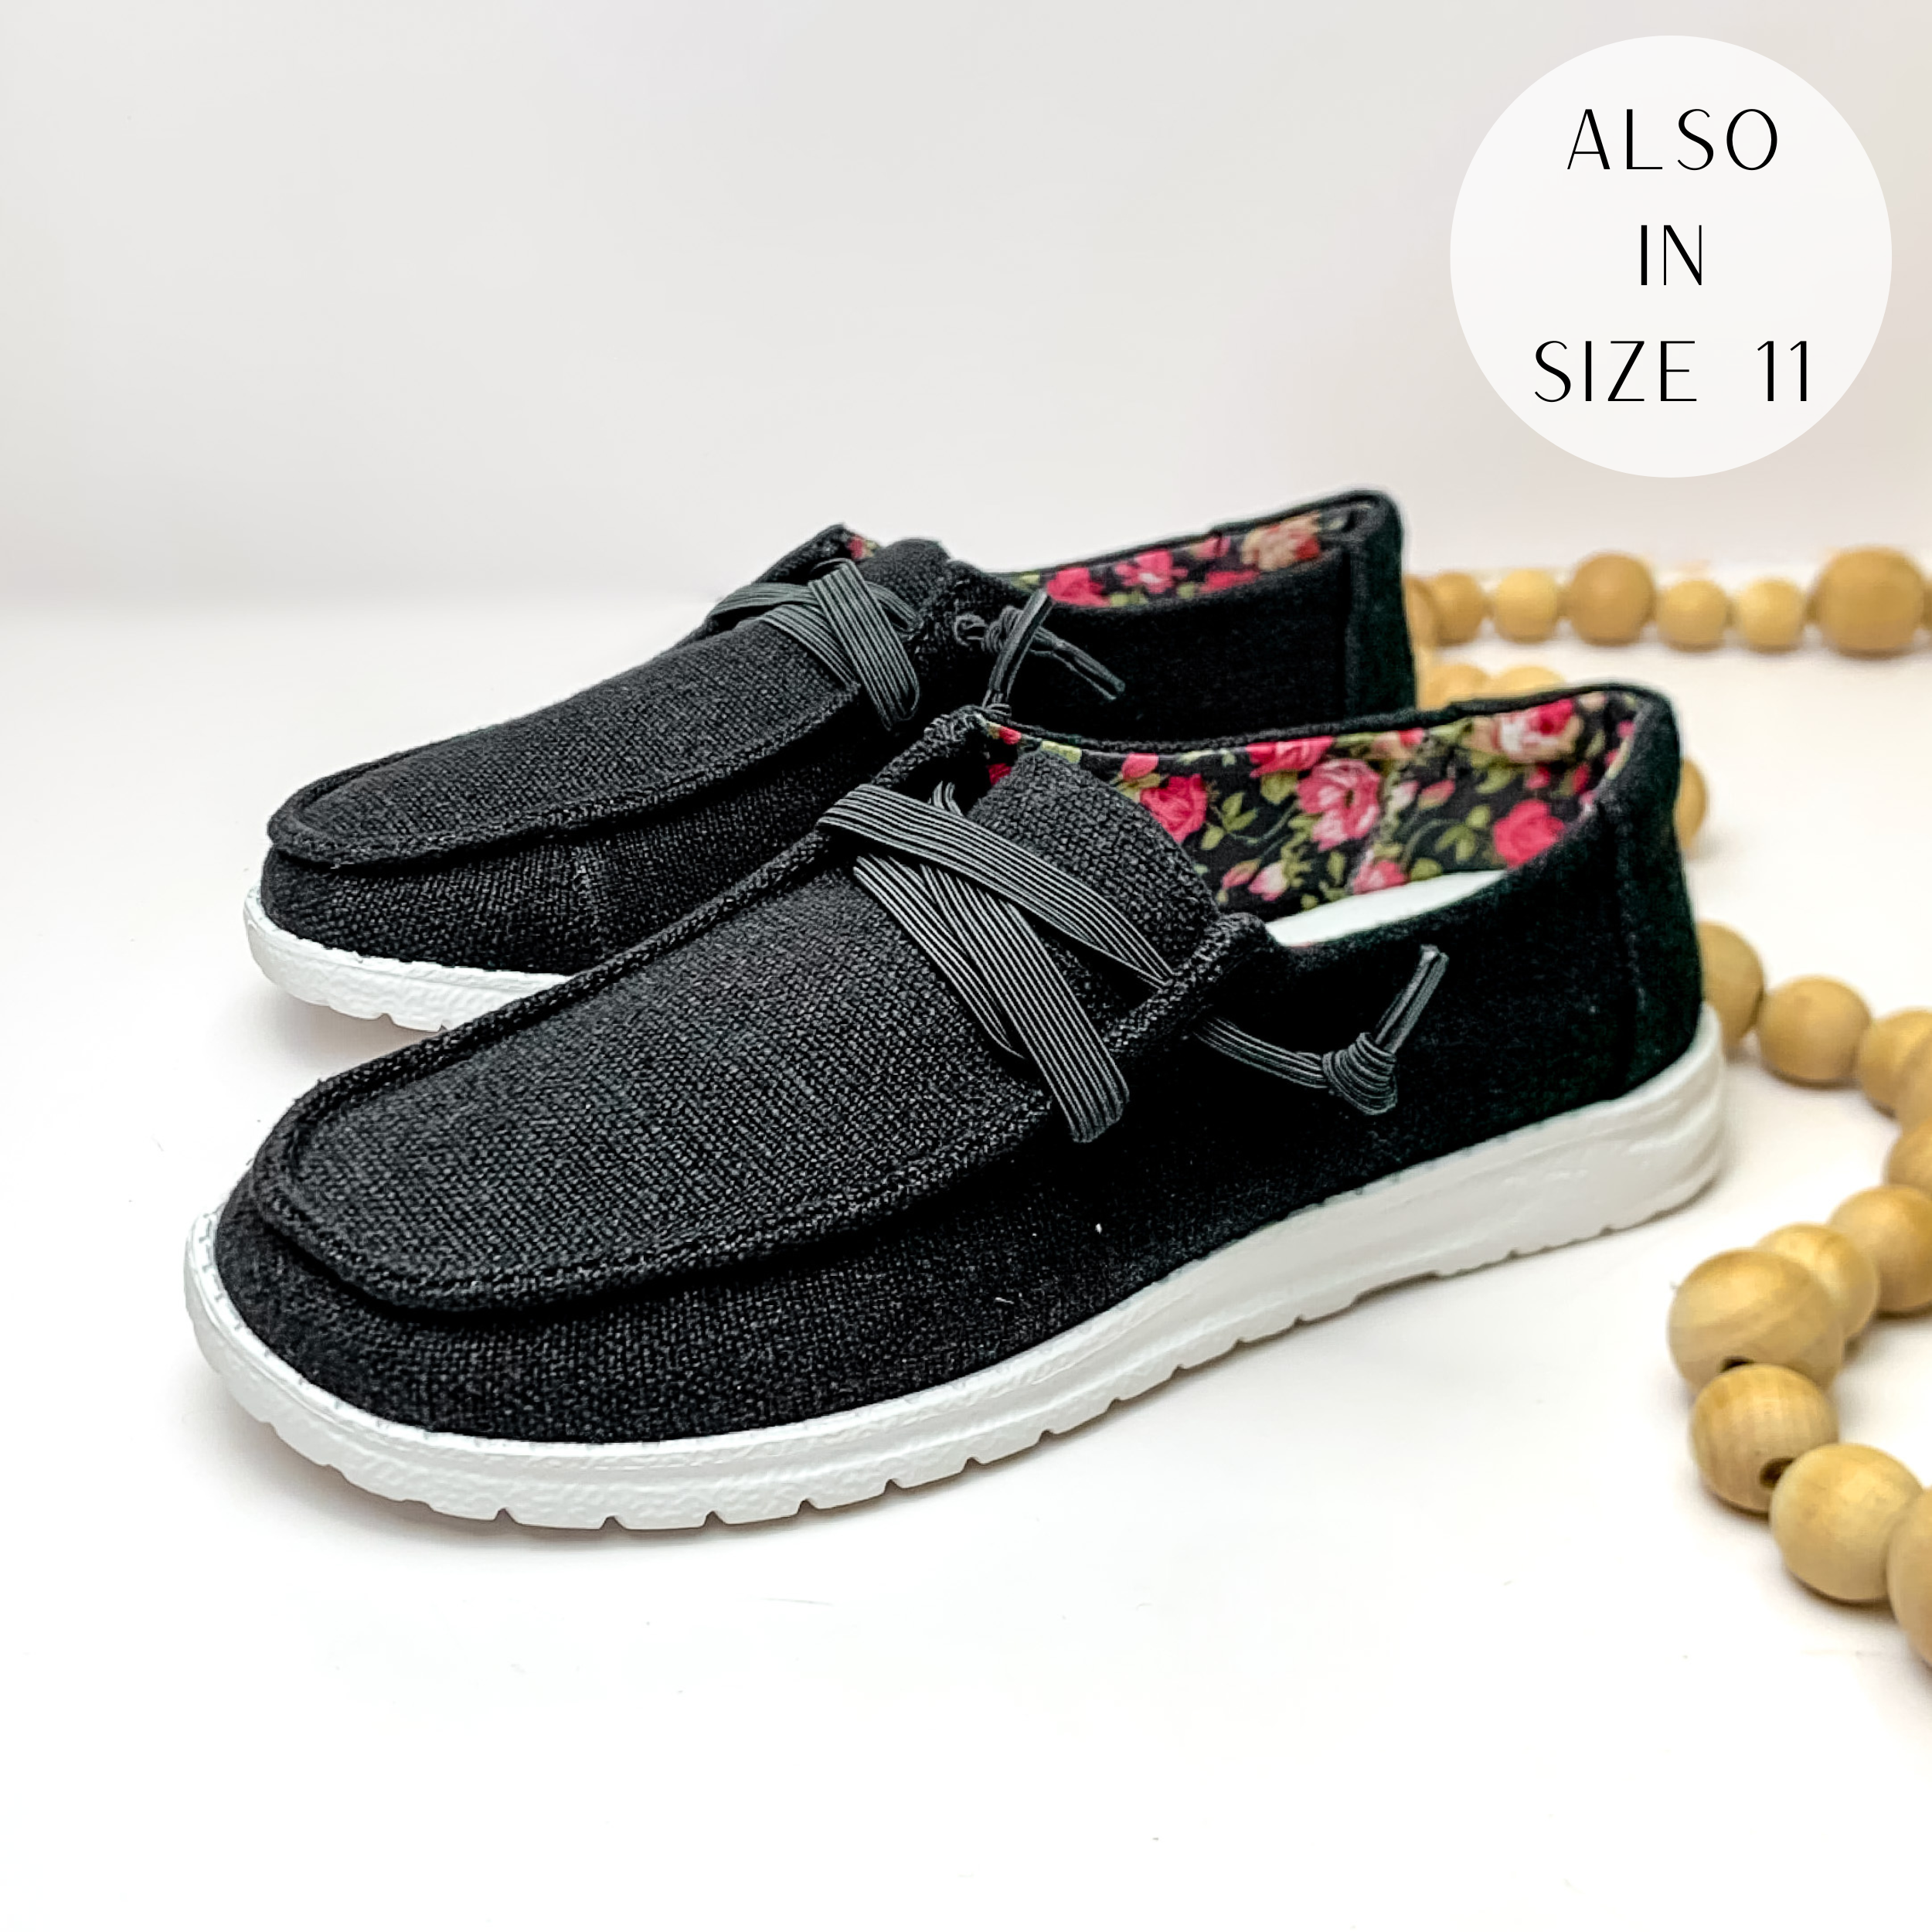 Pictured are a pair of black canvas shoes with a white sole, black laces, and a pink rose pattern inside the shoe. These shoes are pictured on a white background with tan beads on the right side.